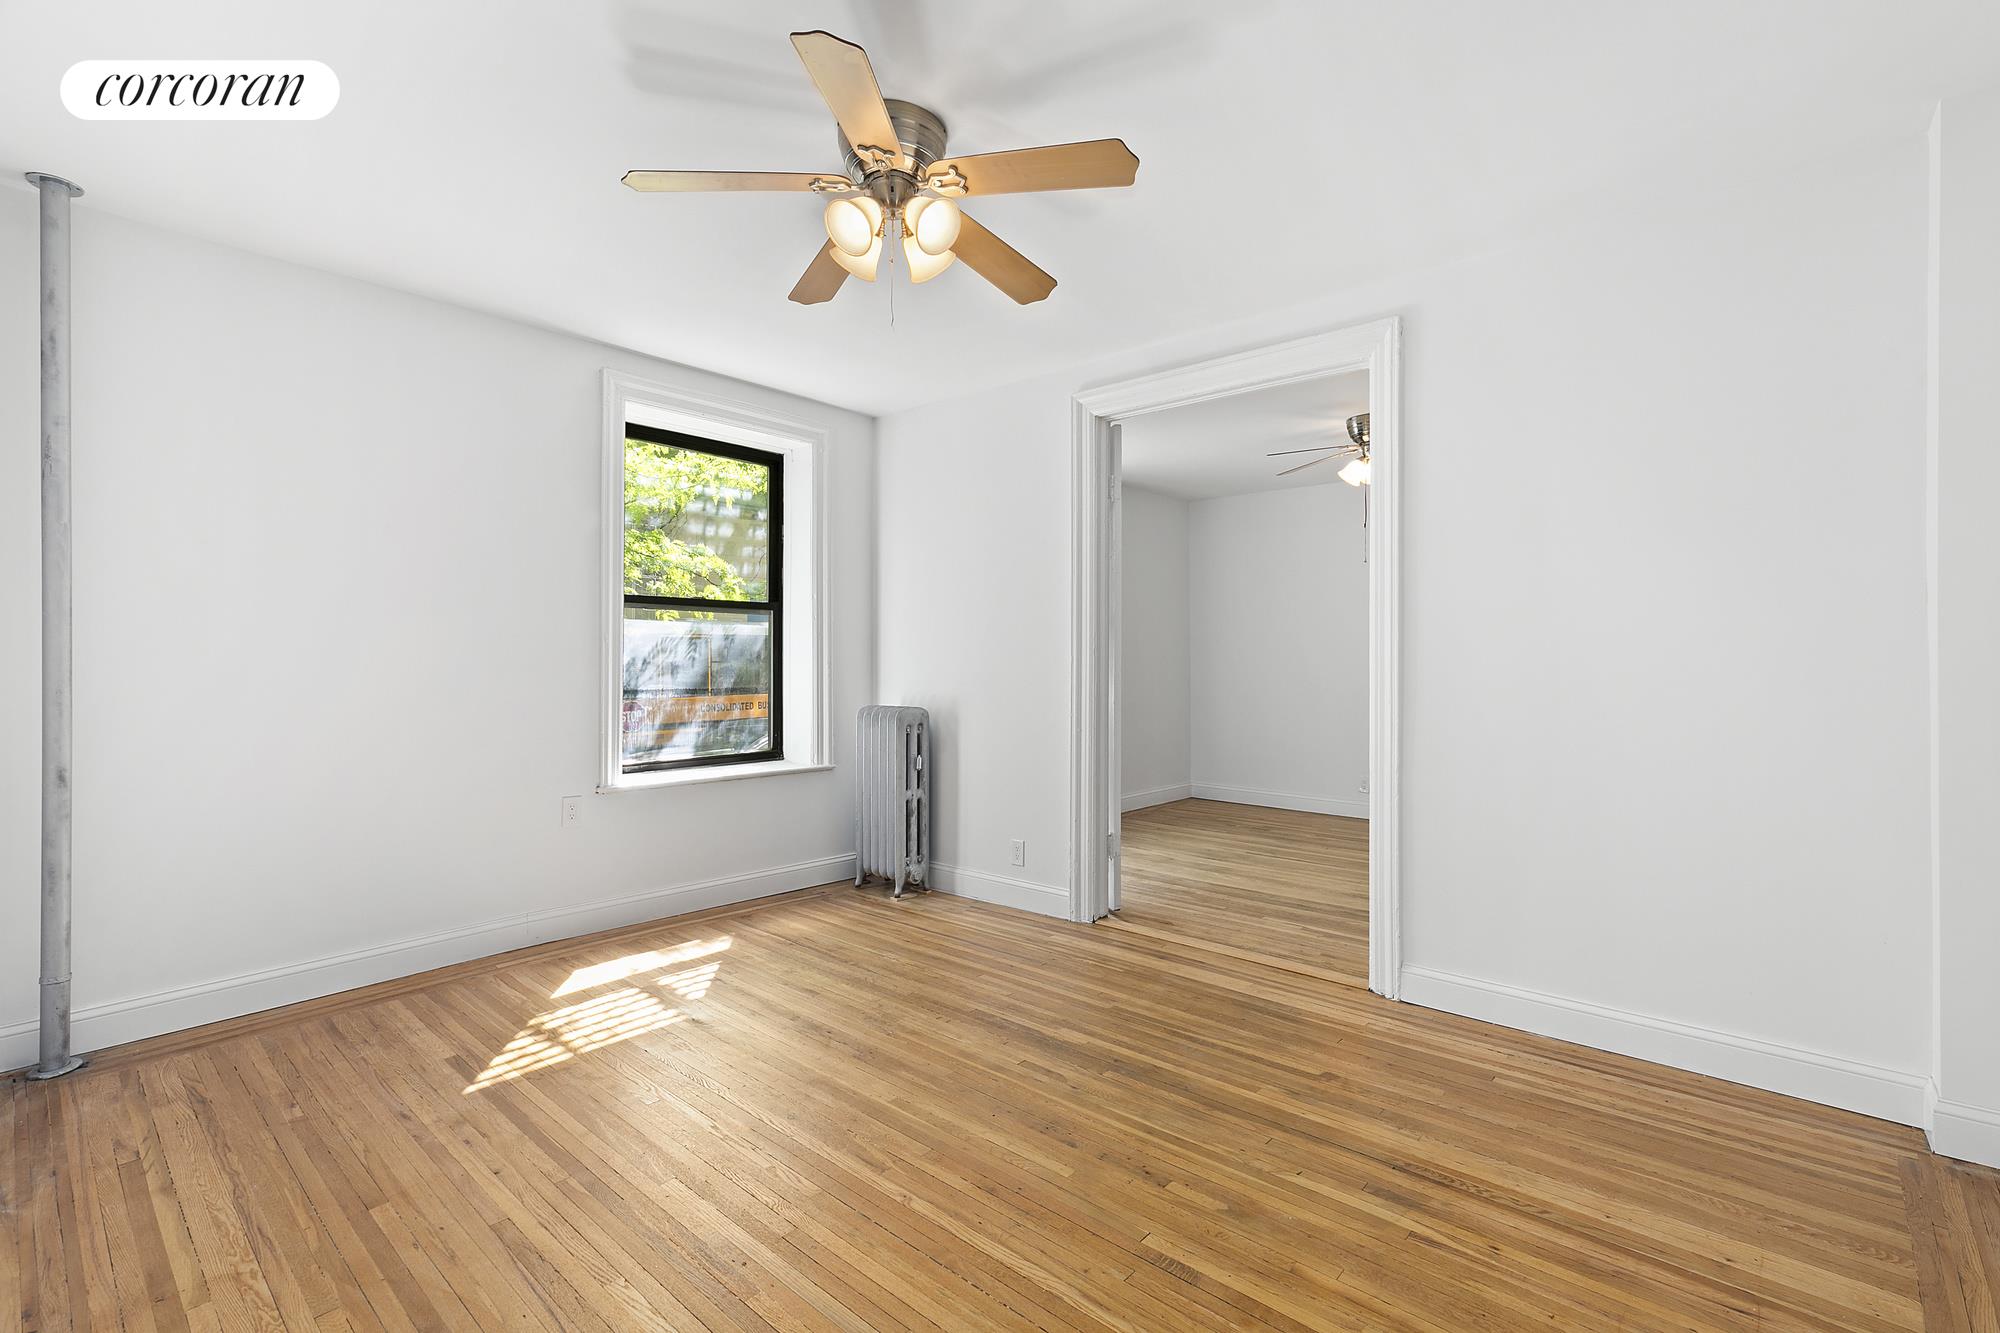 229 West 144th Street, New York City NY 10030 A.N Shell Realty